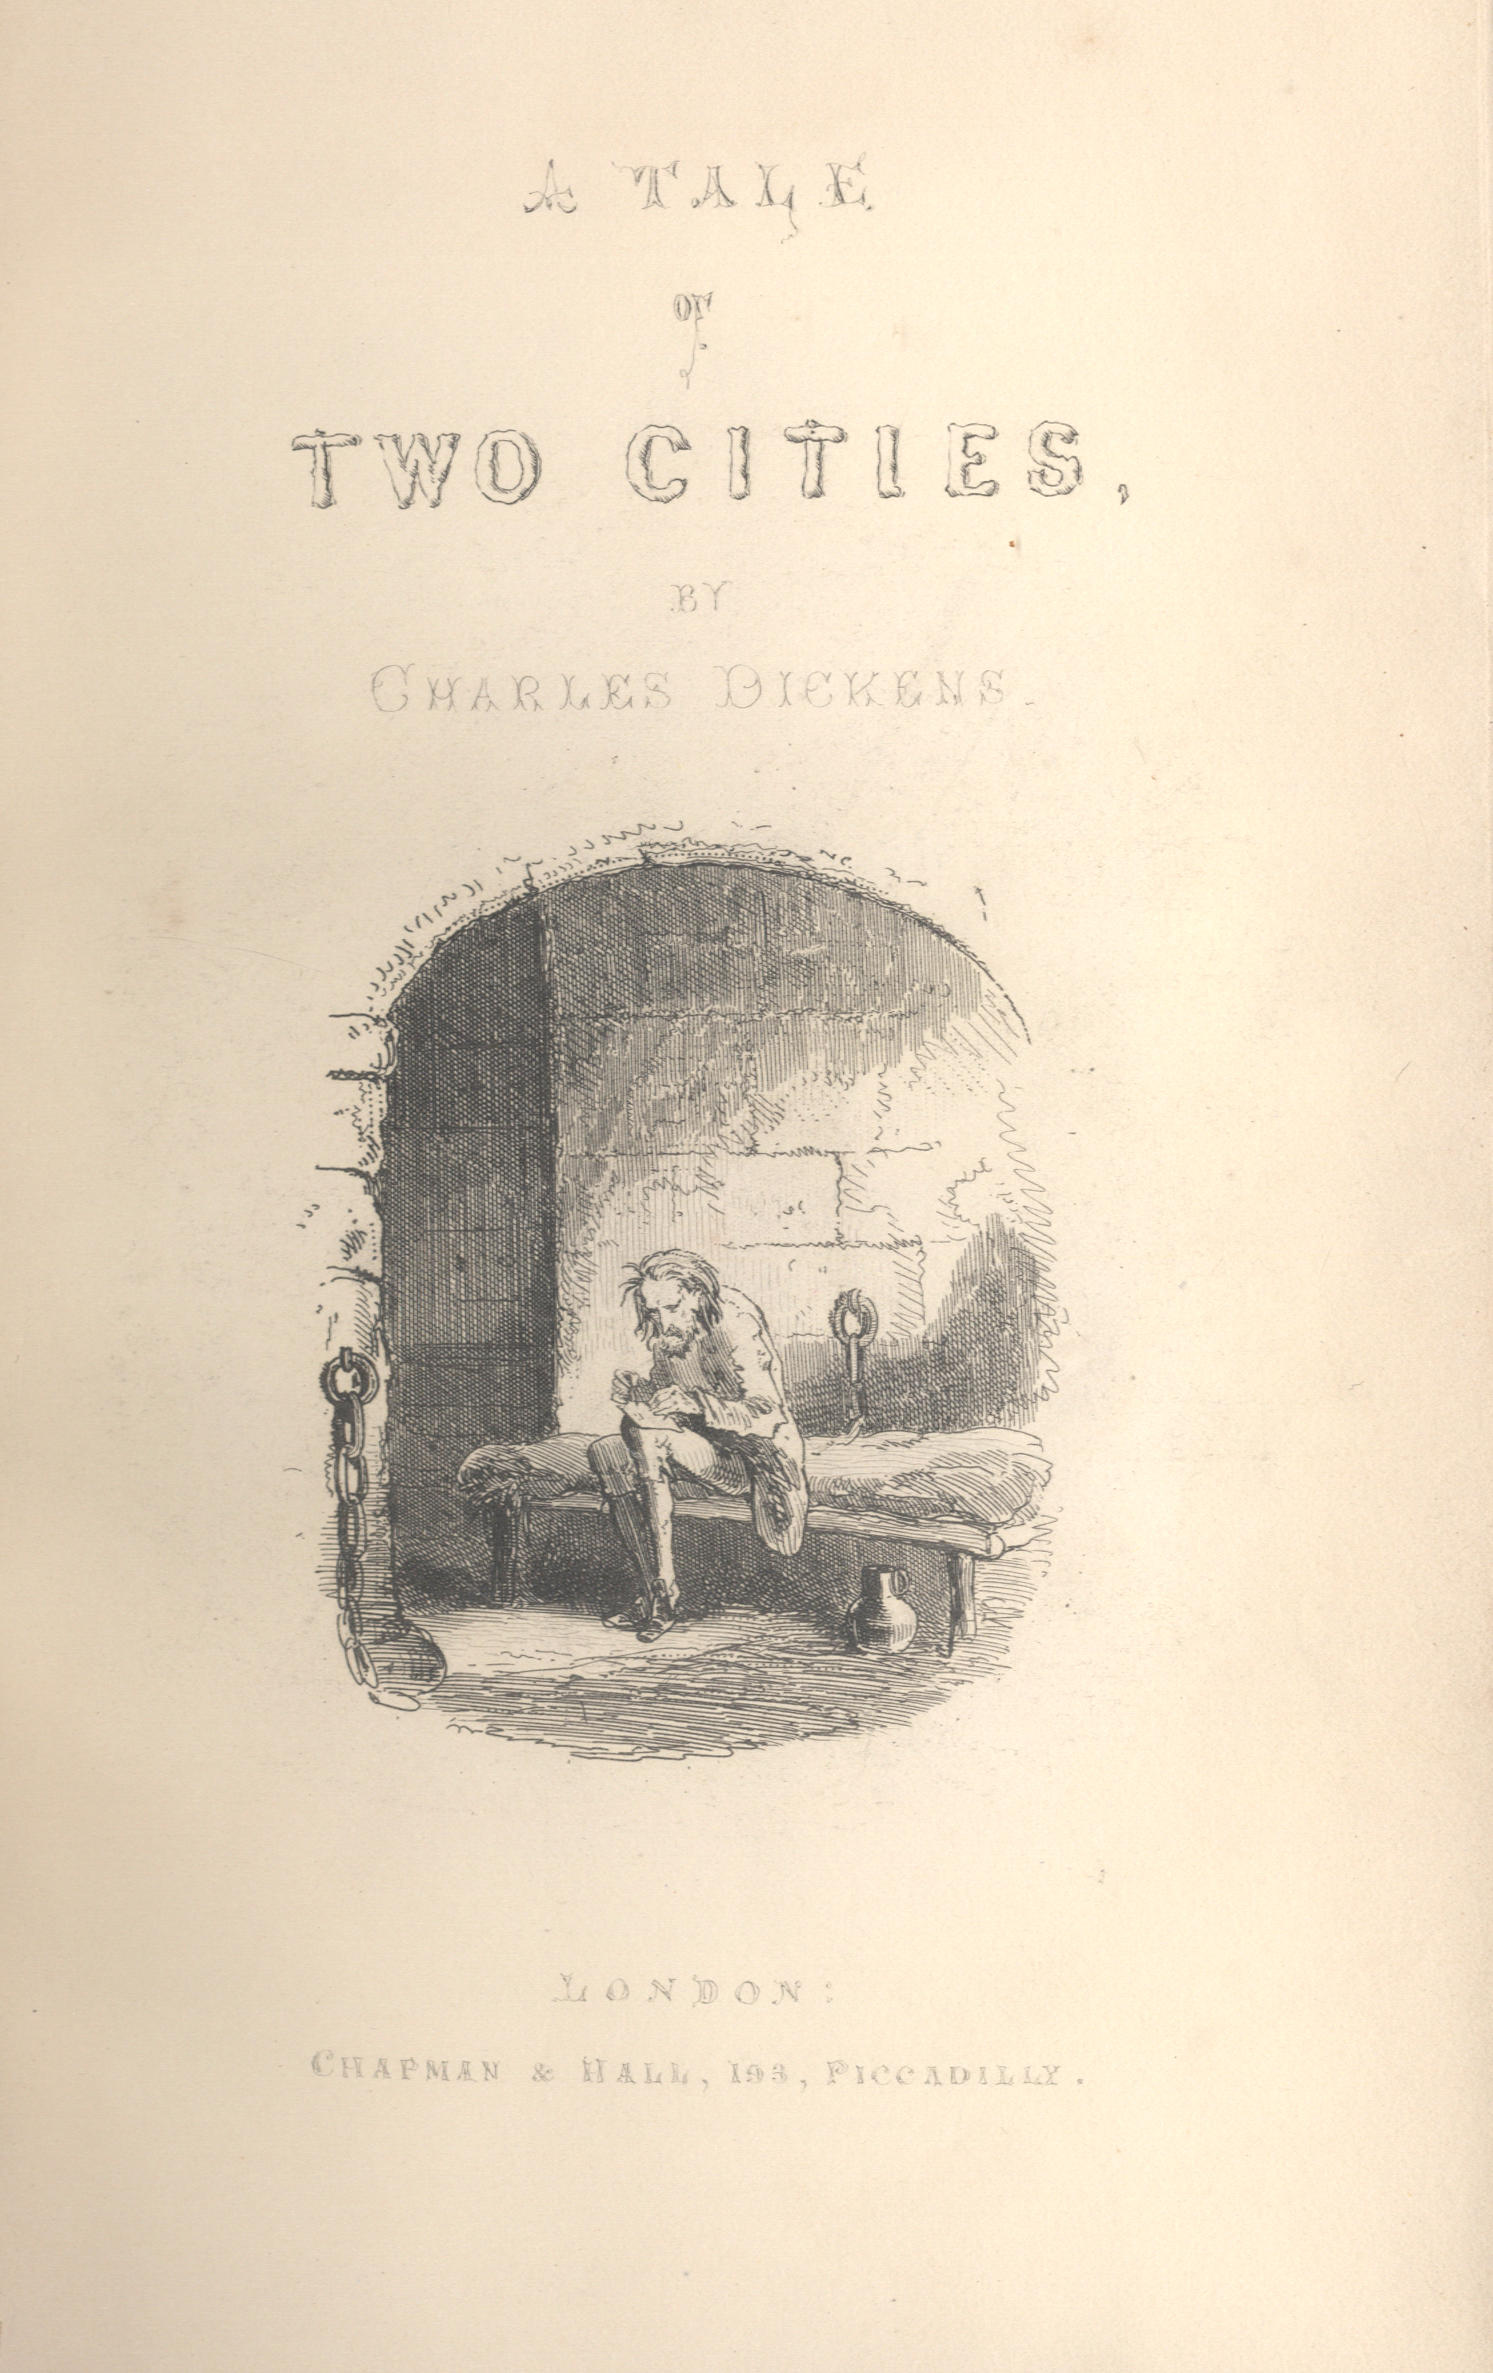 a tale of two cities first edition